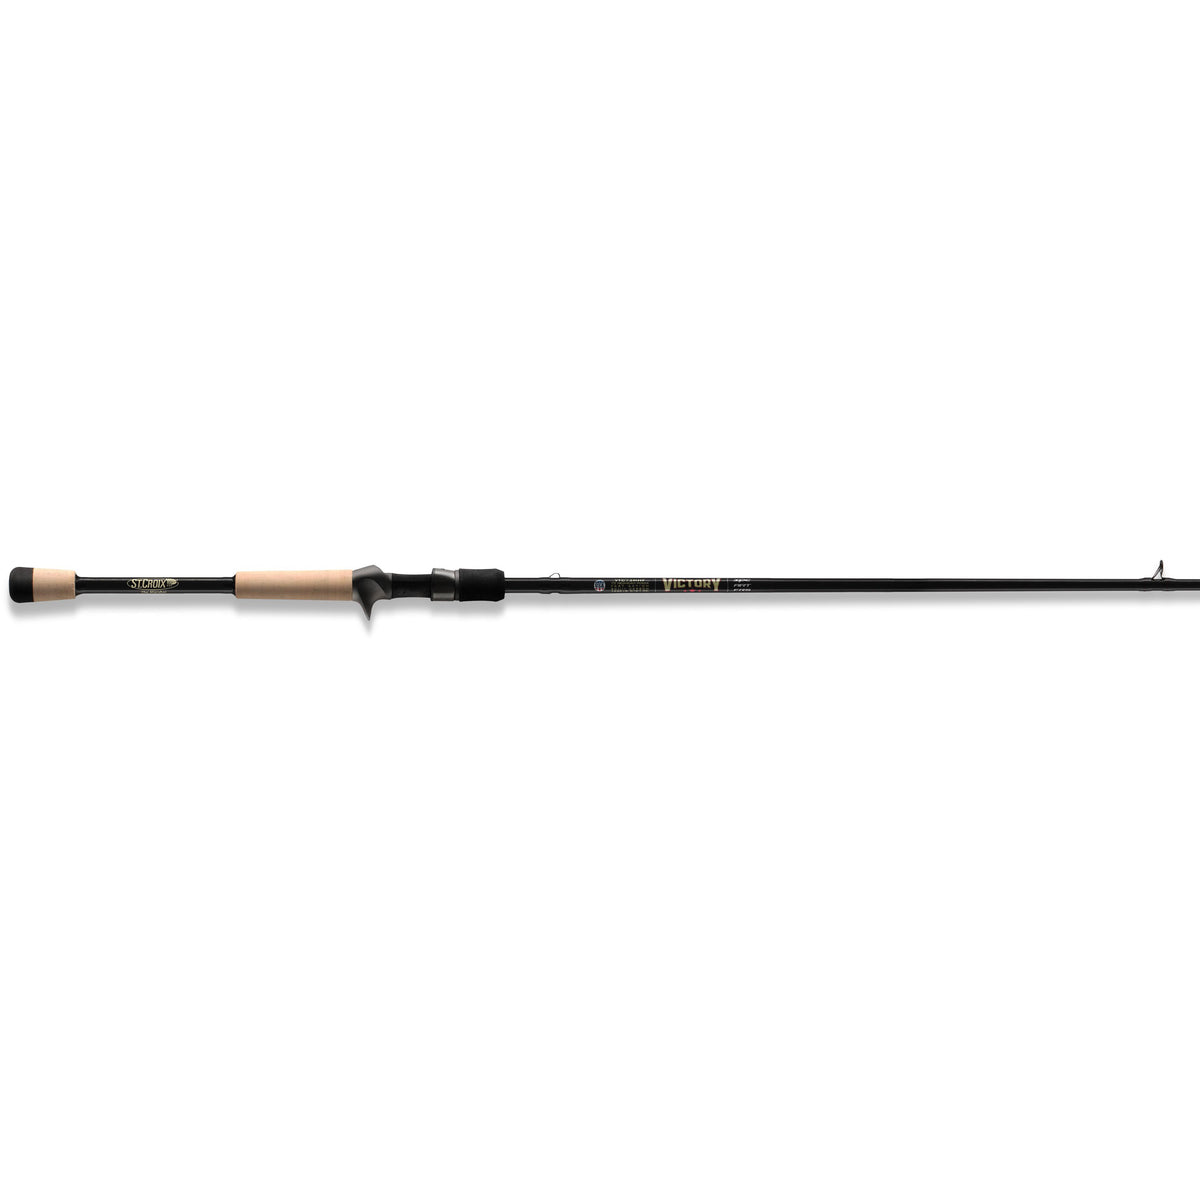 Freshwater Fishing Rods & Reels from Shimano, Daiwa, St. Croix